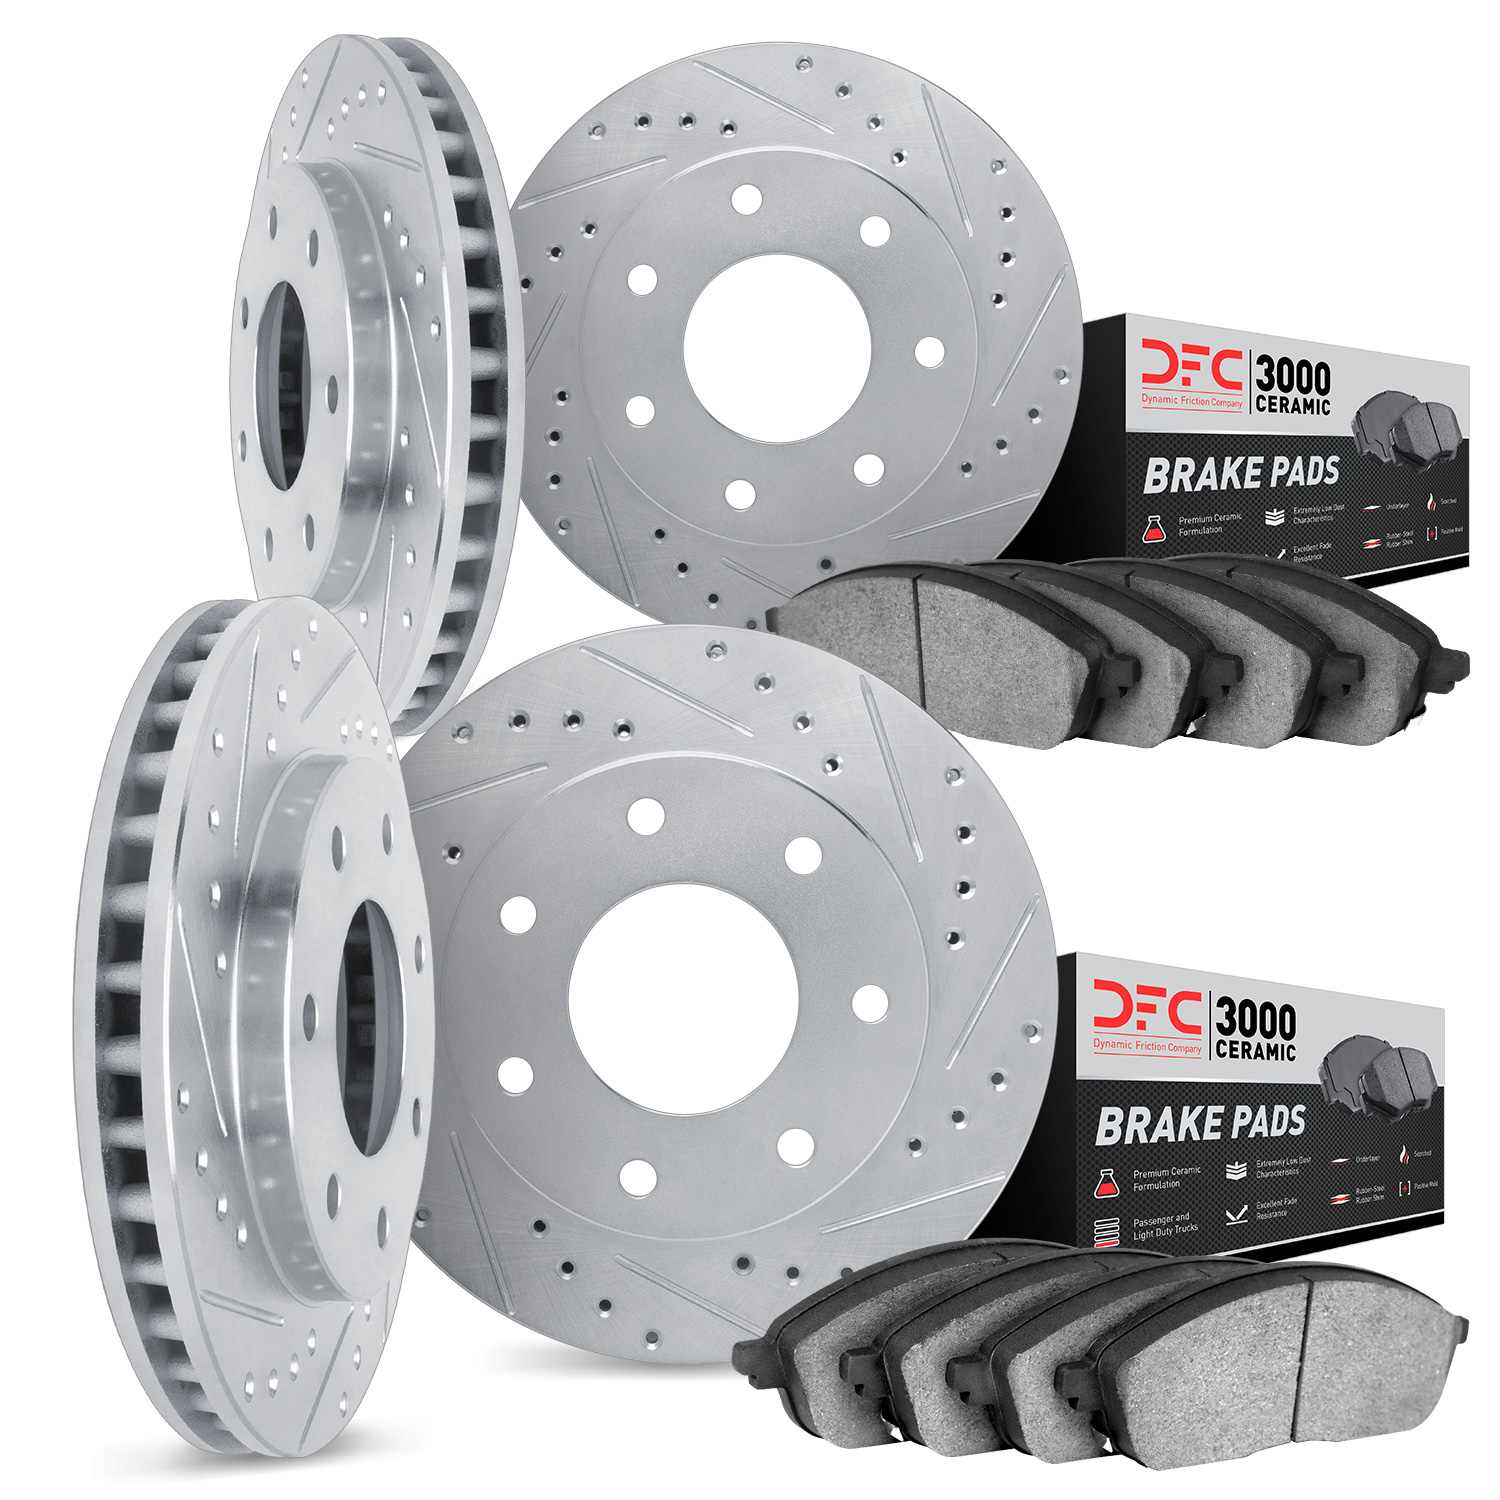 7304-54066 Drilled/Slotted Brake Rotor with 3000-Series Ceramic Brake Pads Kit [Silver], 2004-2008 Ford/Lincoln/Mercury/Mazda, P